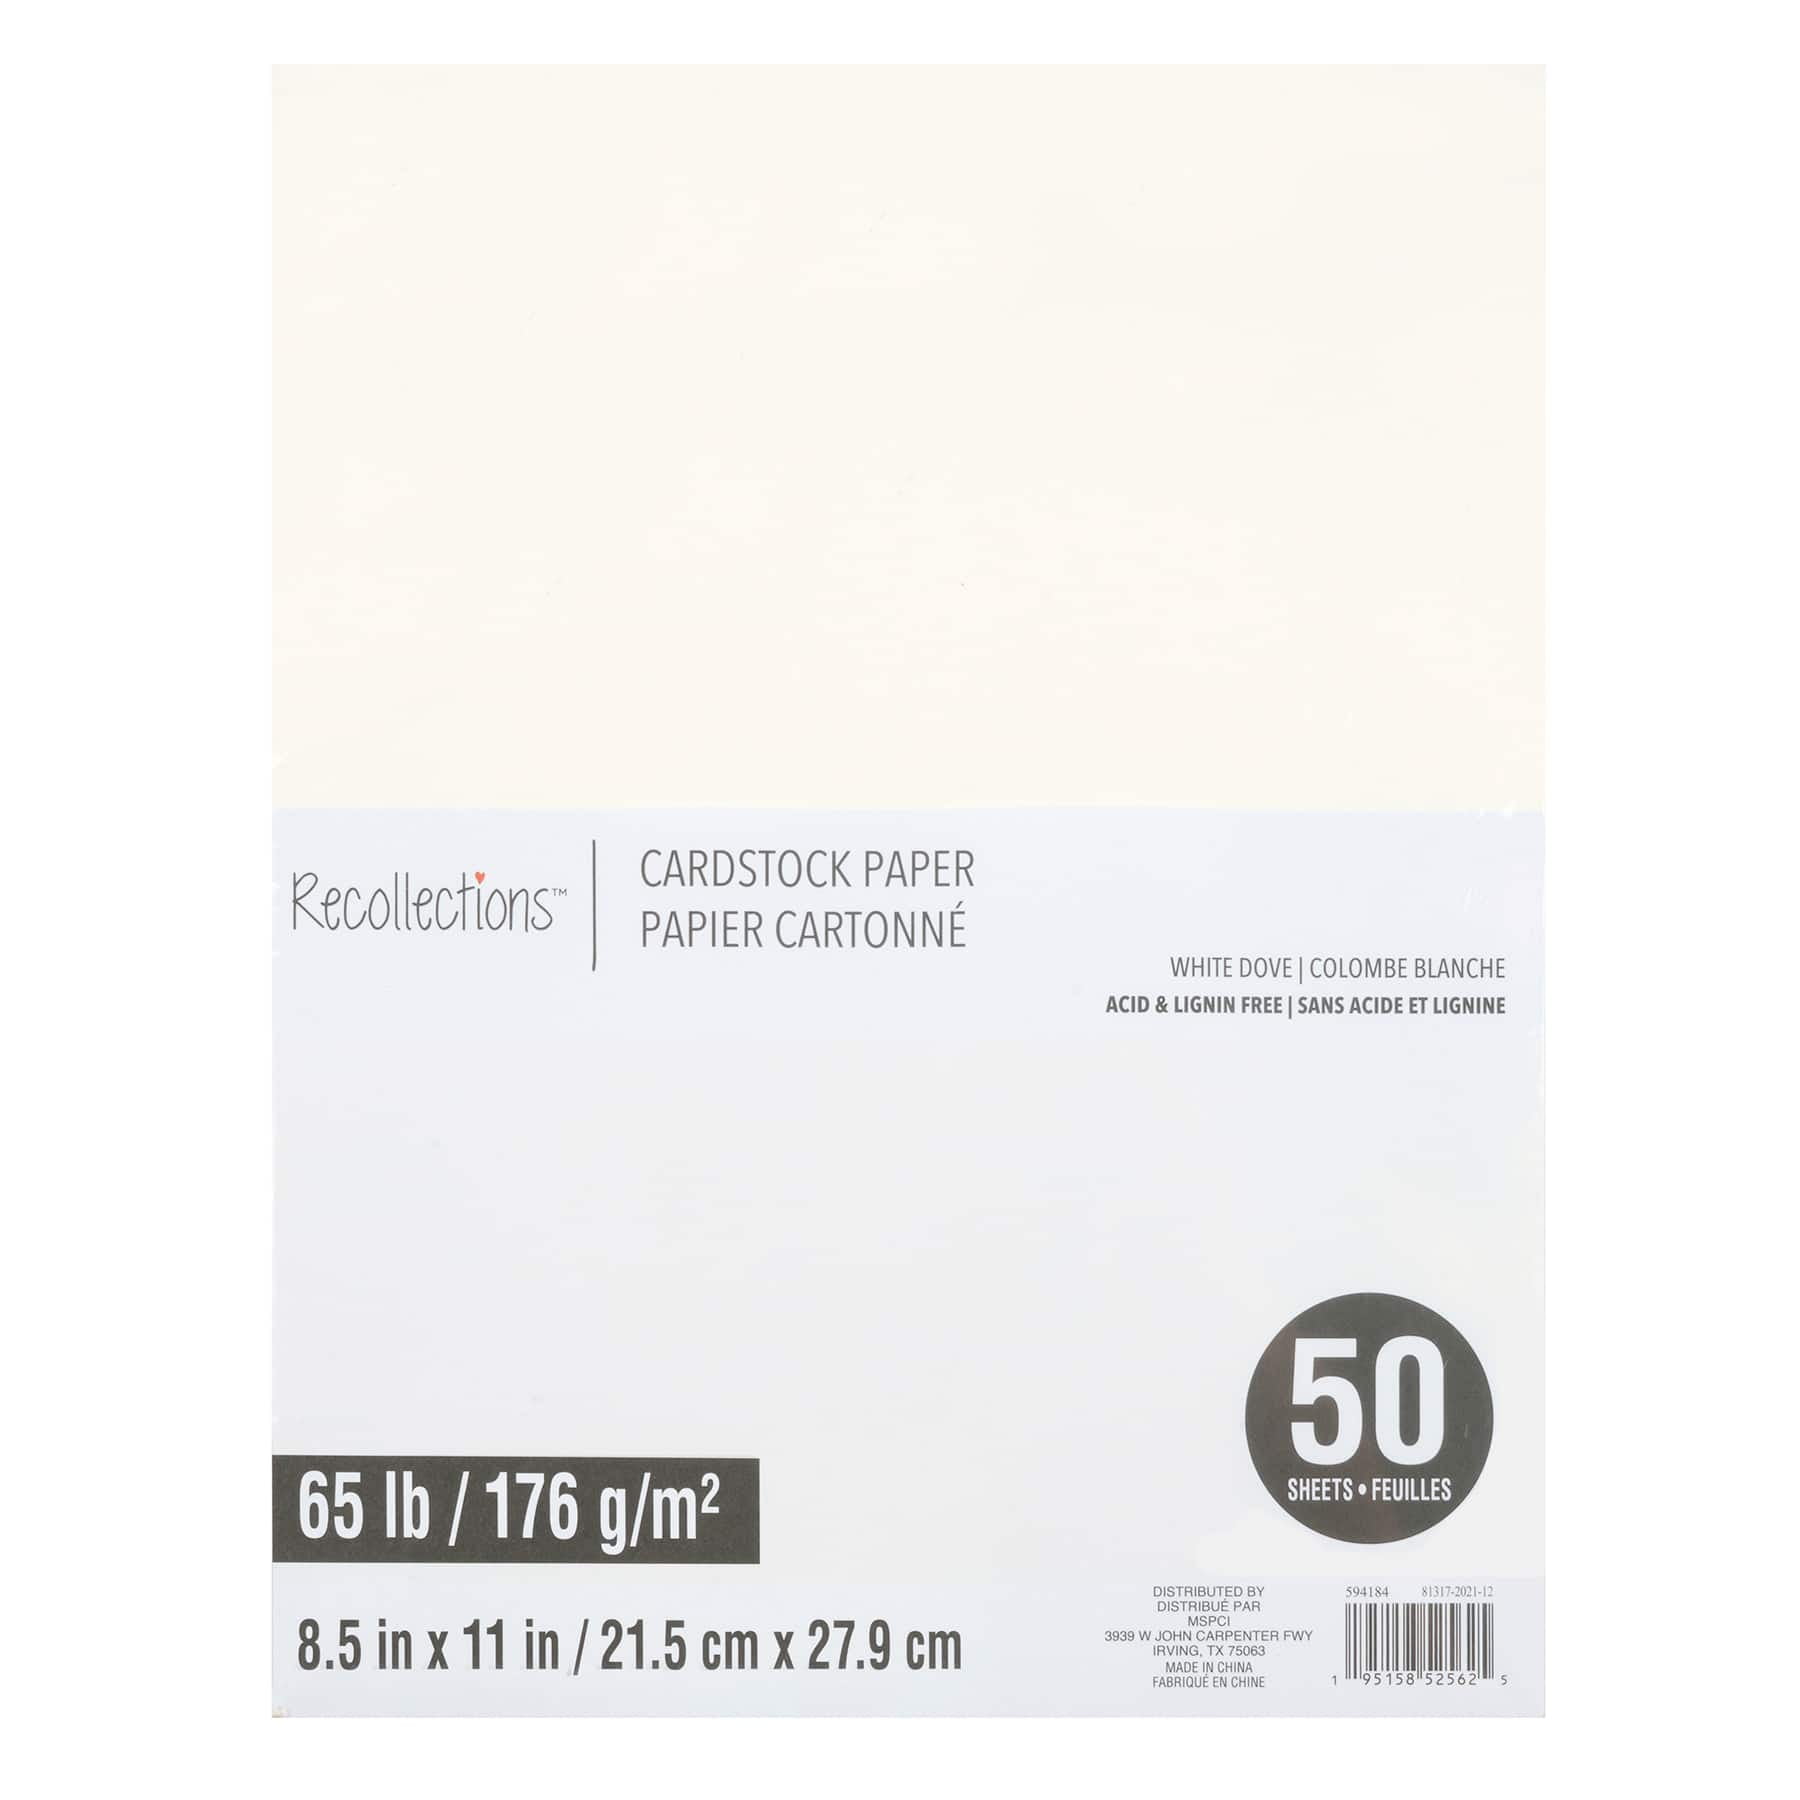 Recollections Foil Cardstock Paper - Primary Foil, 25ct Sheets, 8.5x11 65lb